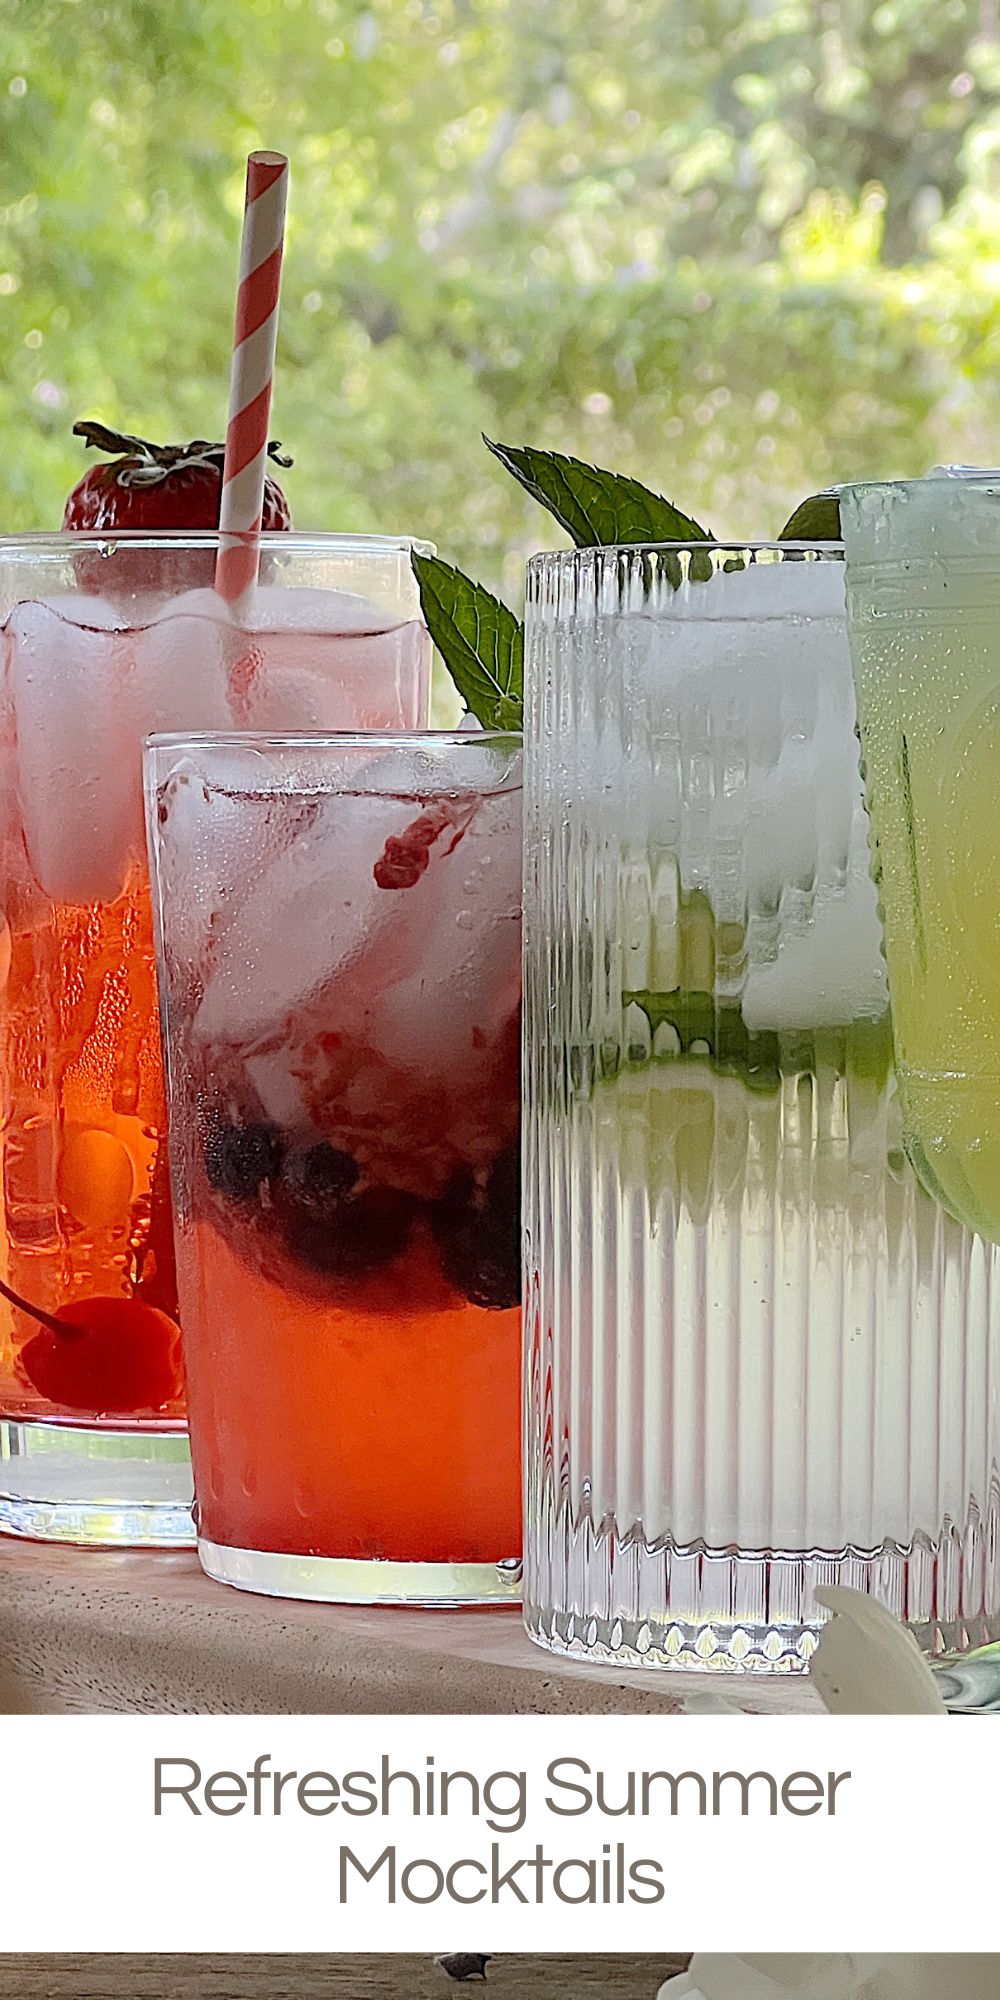 Sipping on a refreshing beverage during the summer is a delightful way to quench your thirst. Let's make some summer mocktails!